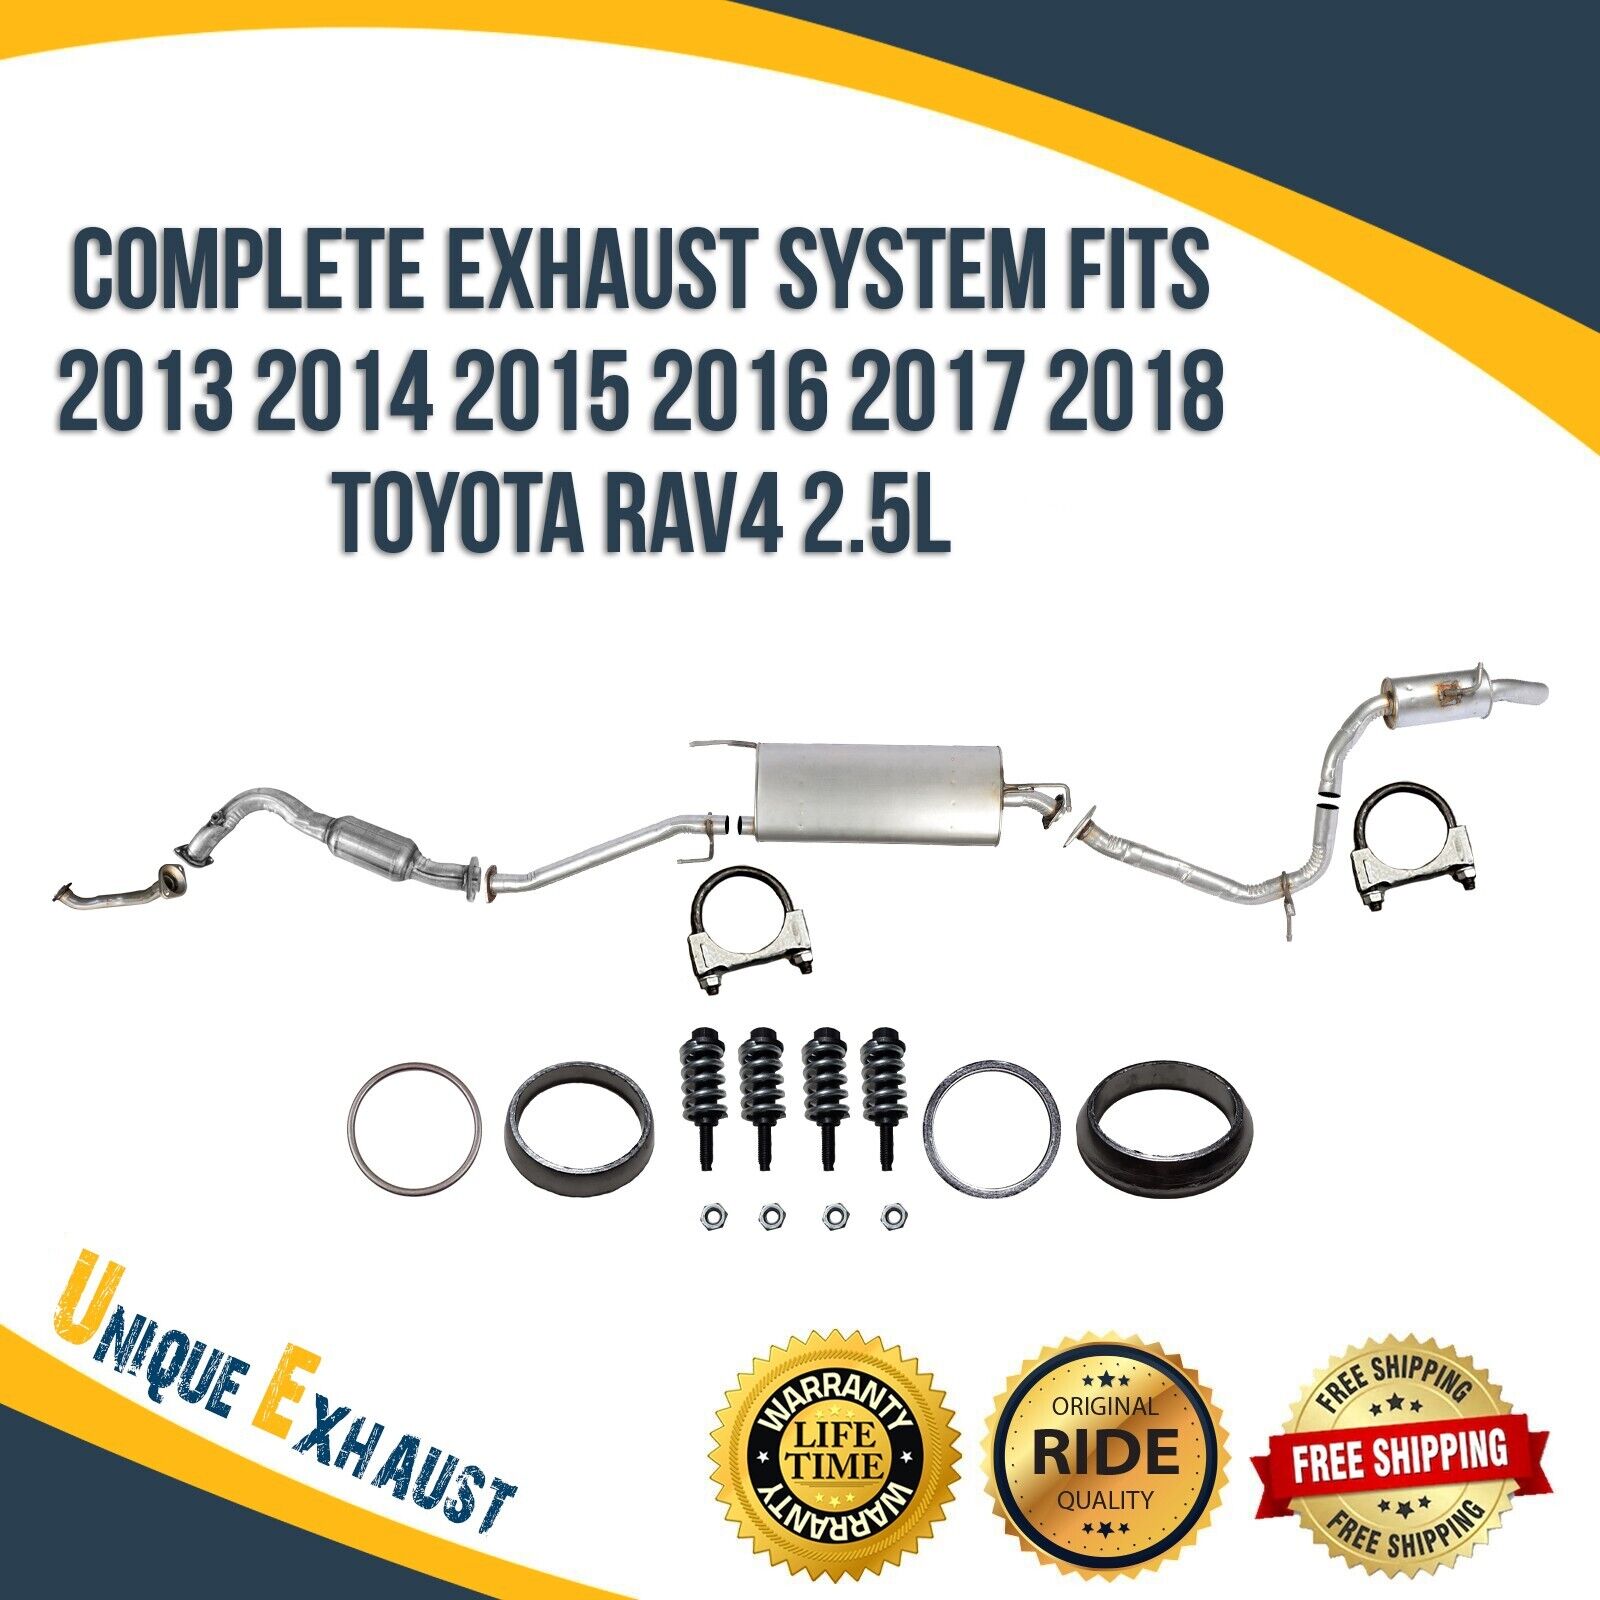 Complete Exhaust System Fits 2013 2014 2015 2016 2017 2018 Toyota RAV4 2.5L